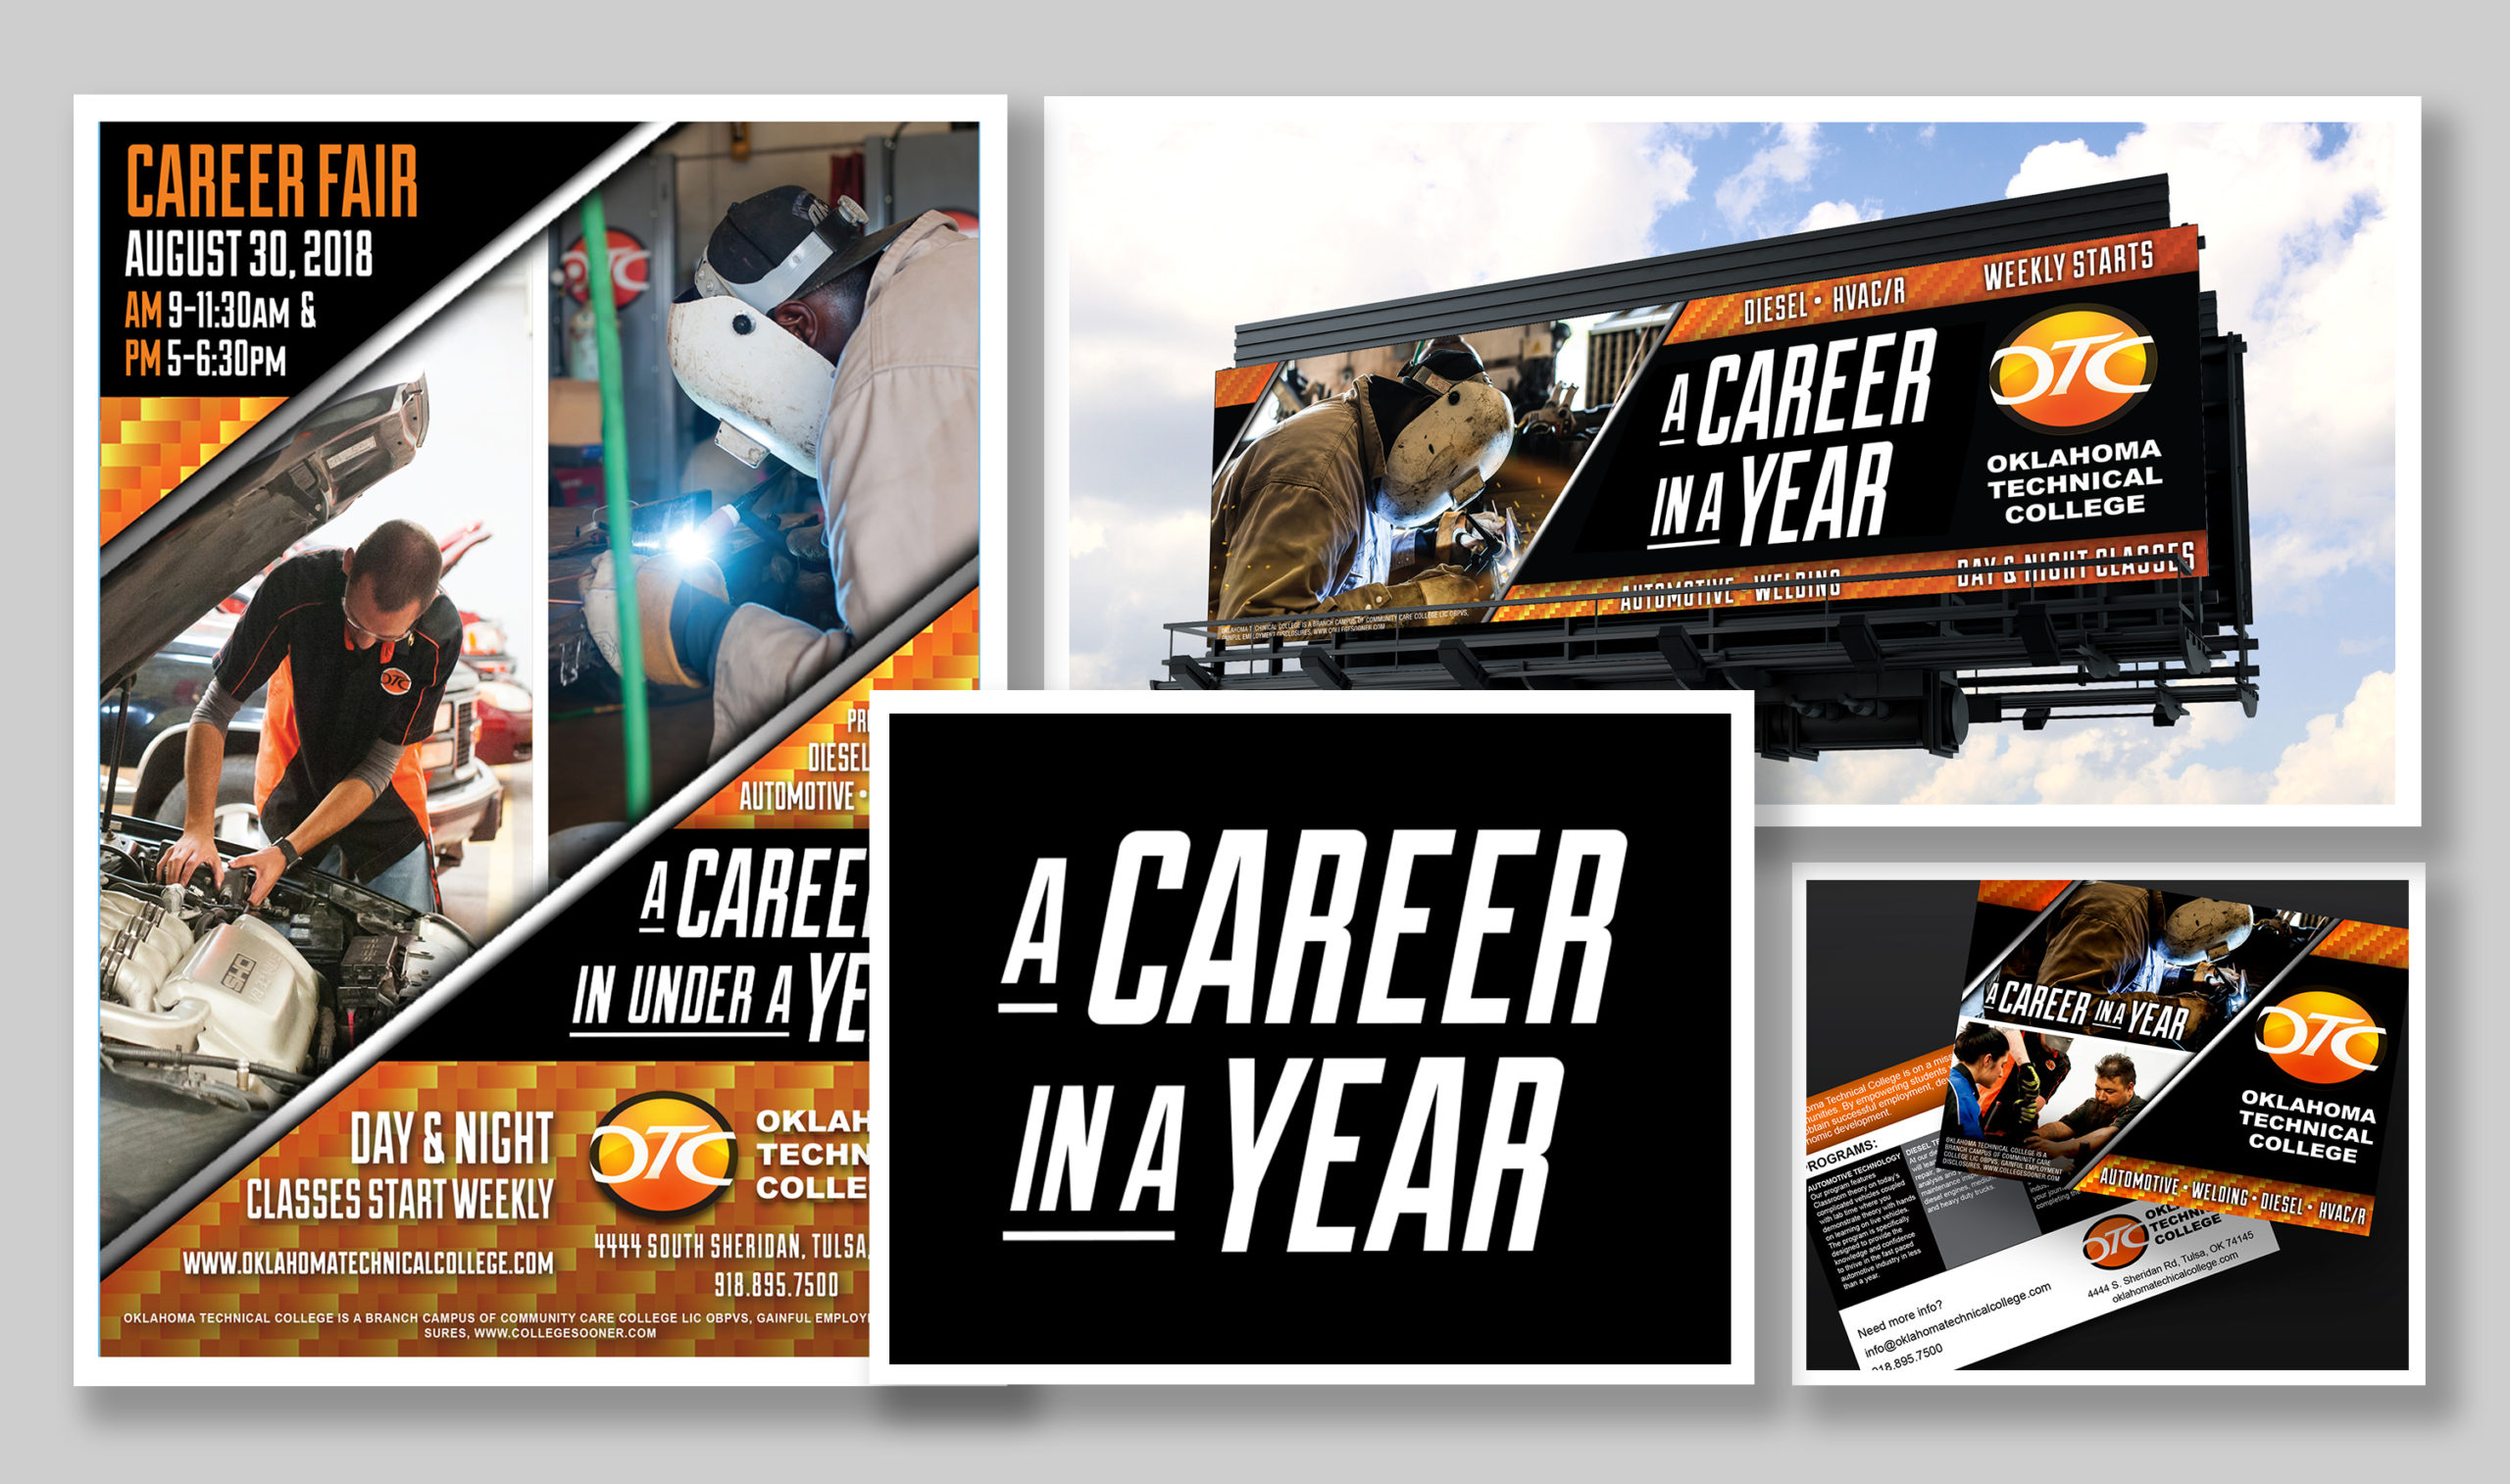 OTC Career in a Year Campaign